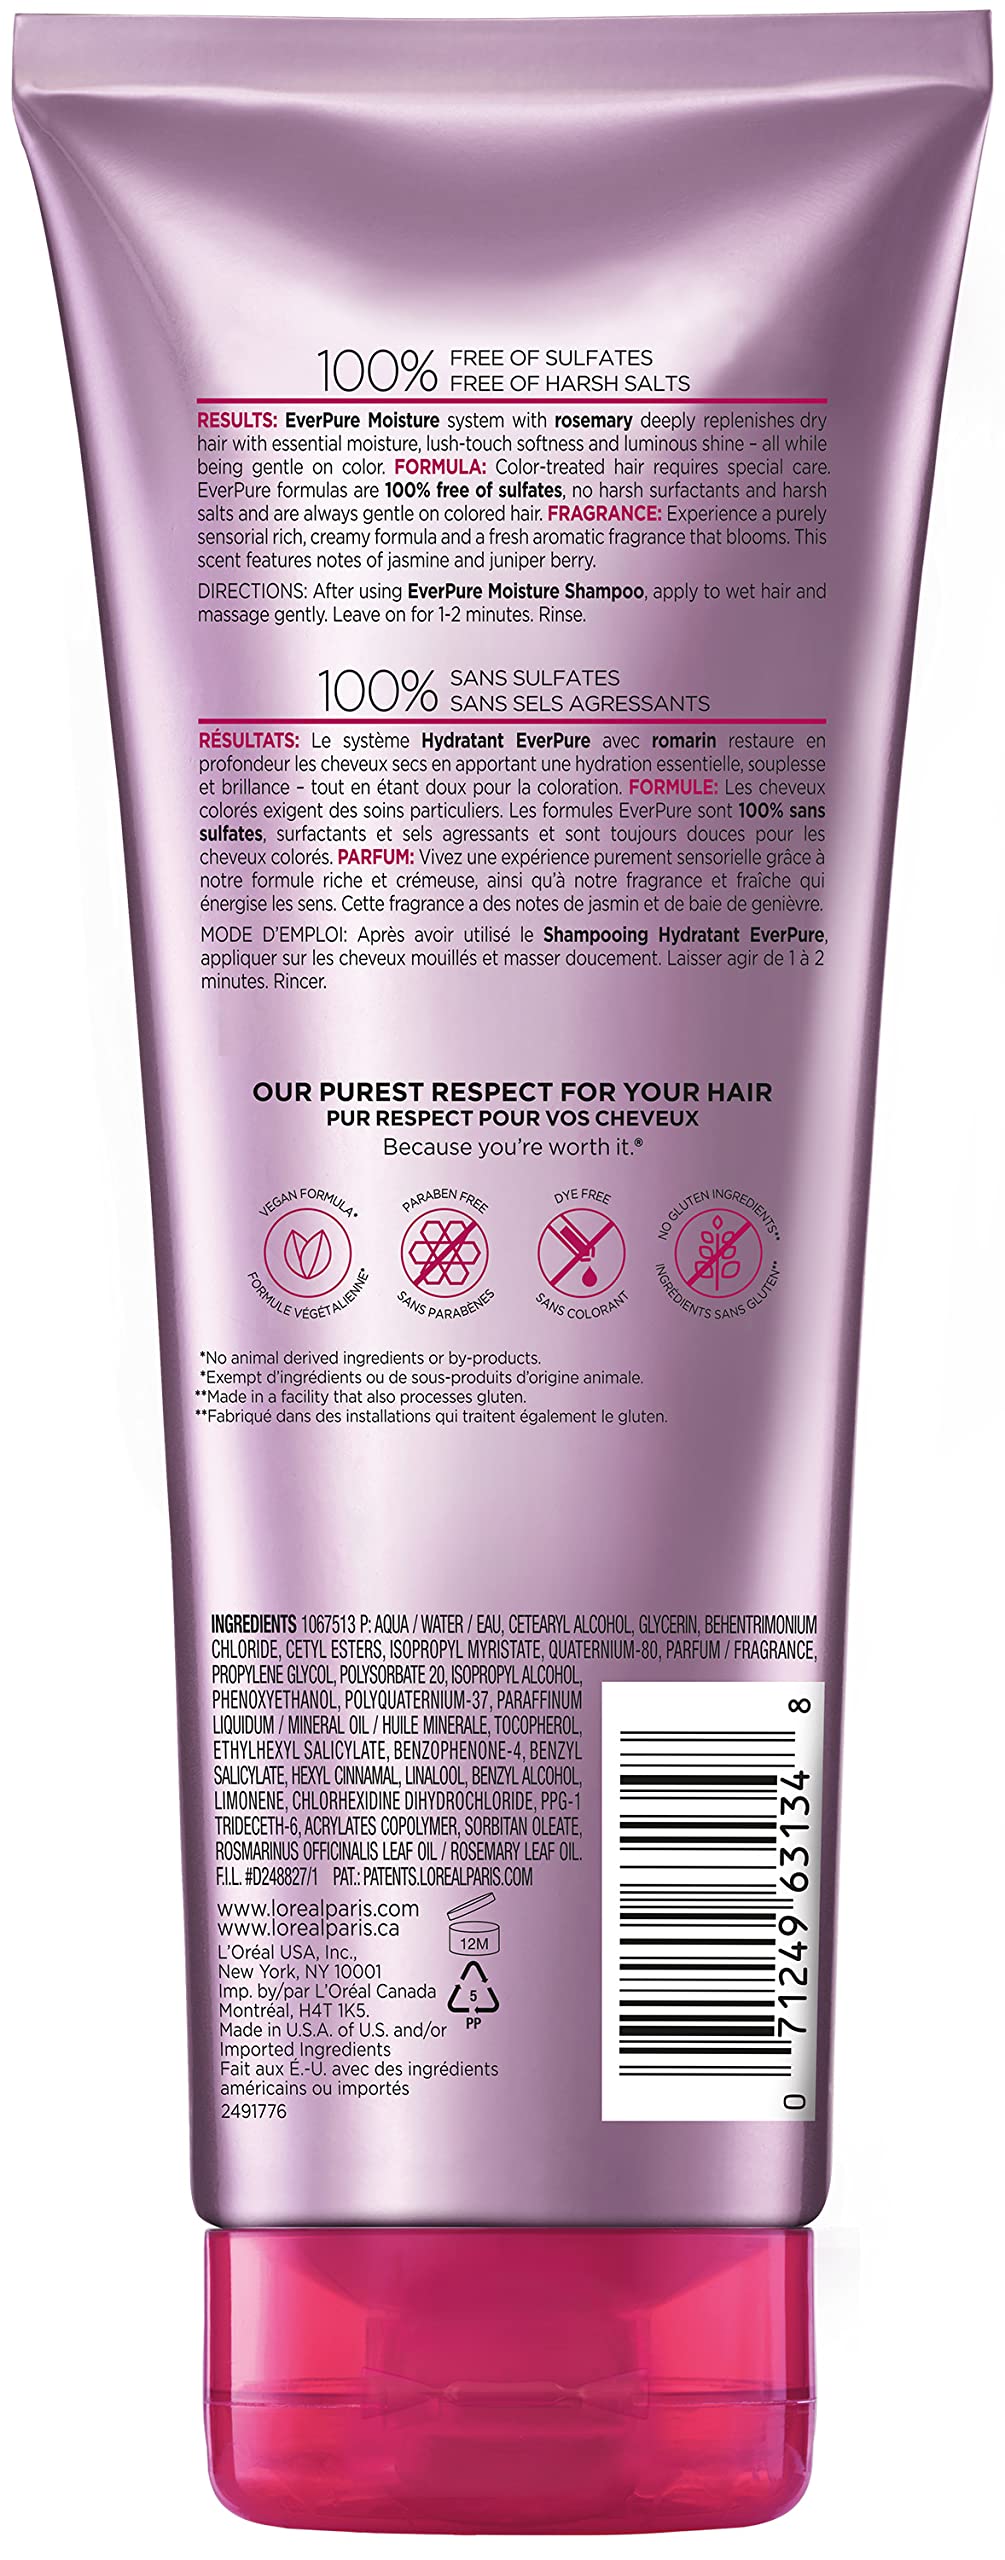 L'Oreal Paris EverPure Moisture Sulfate Free Conditioner, Hair Care for Color-Treated Hair with Rosemary Botanicals, 11 Fl Oz